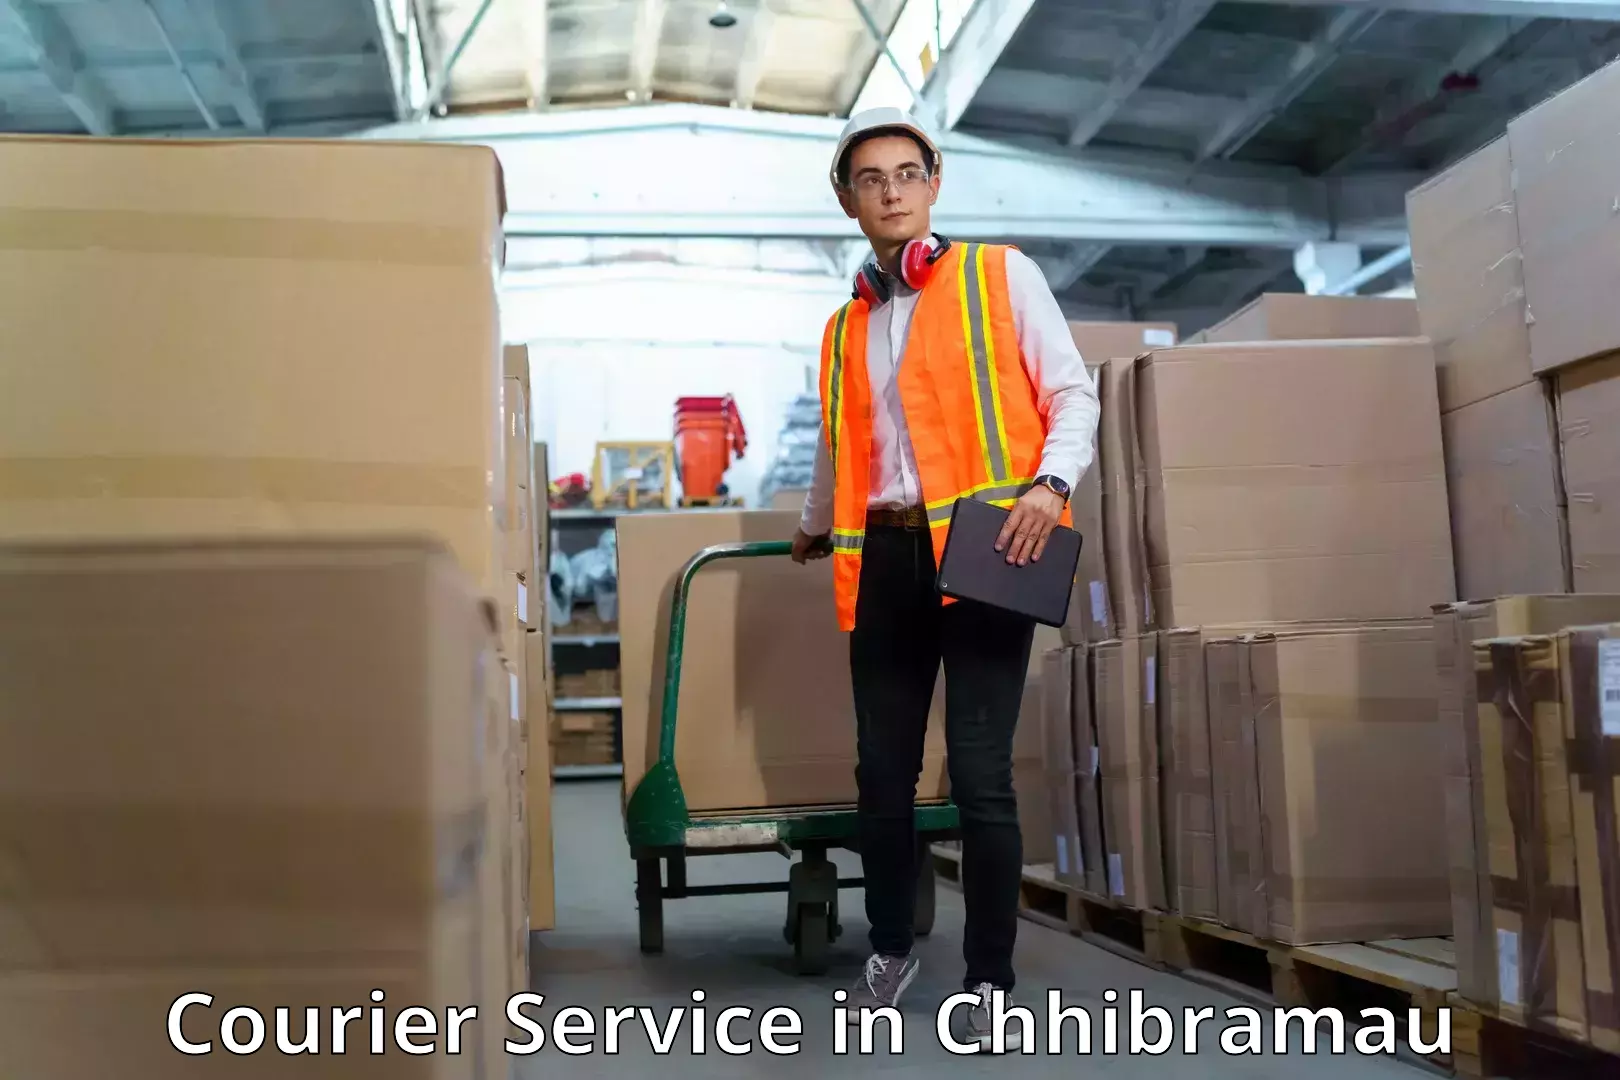 Full-service courier options in Chhibramau